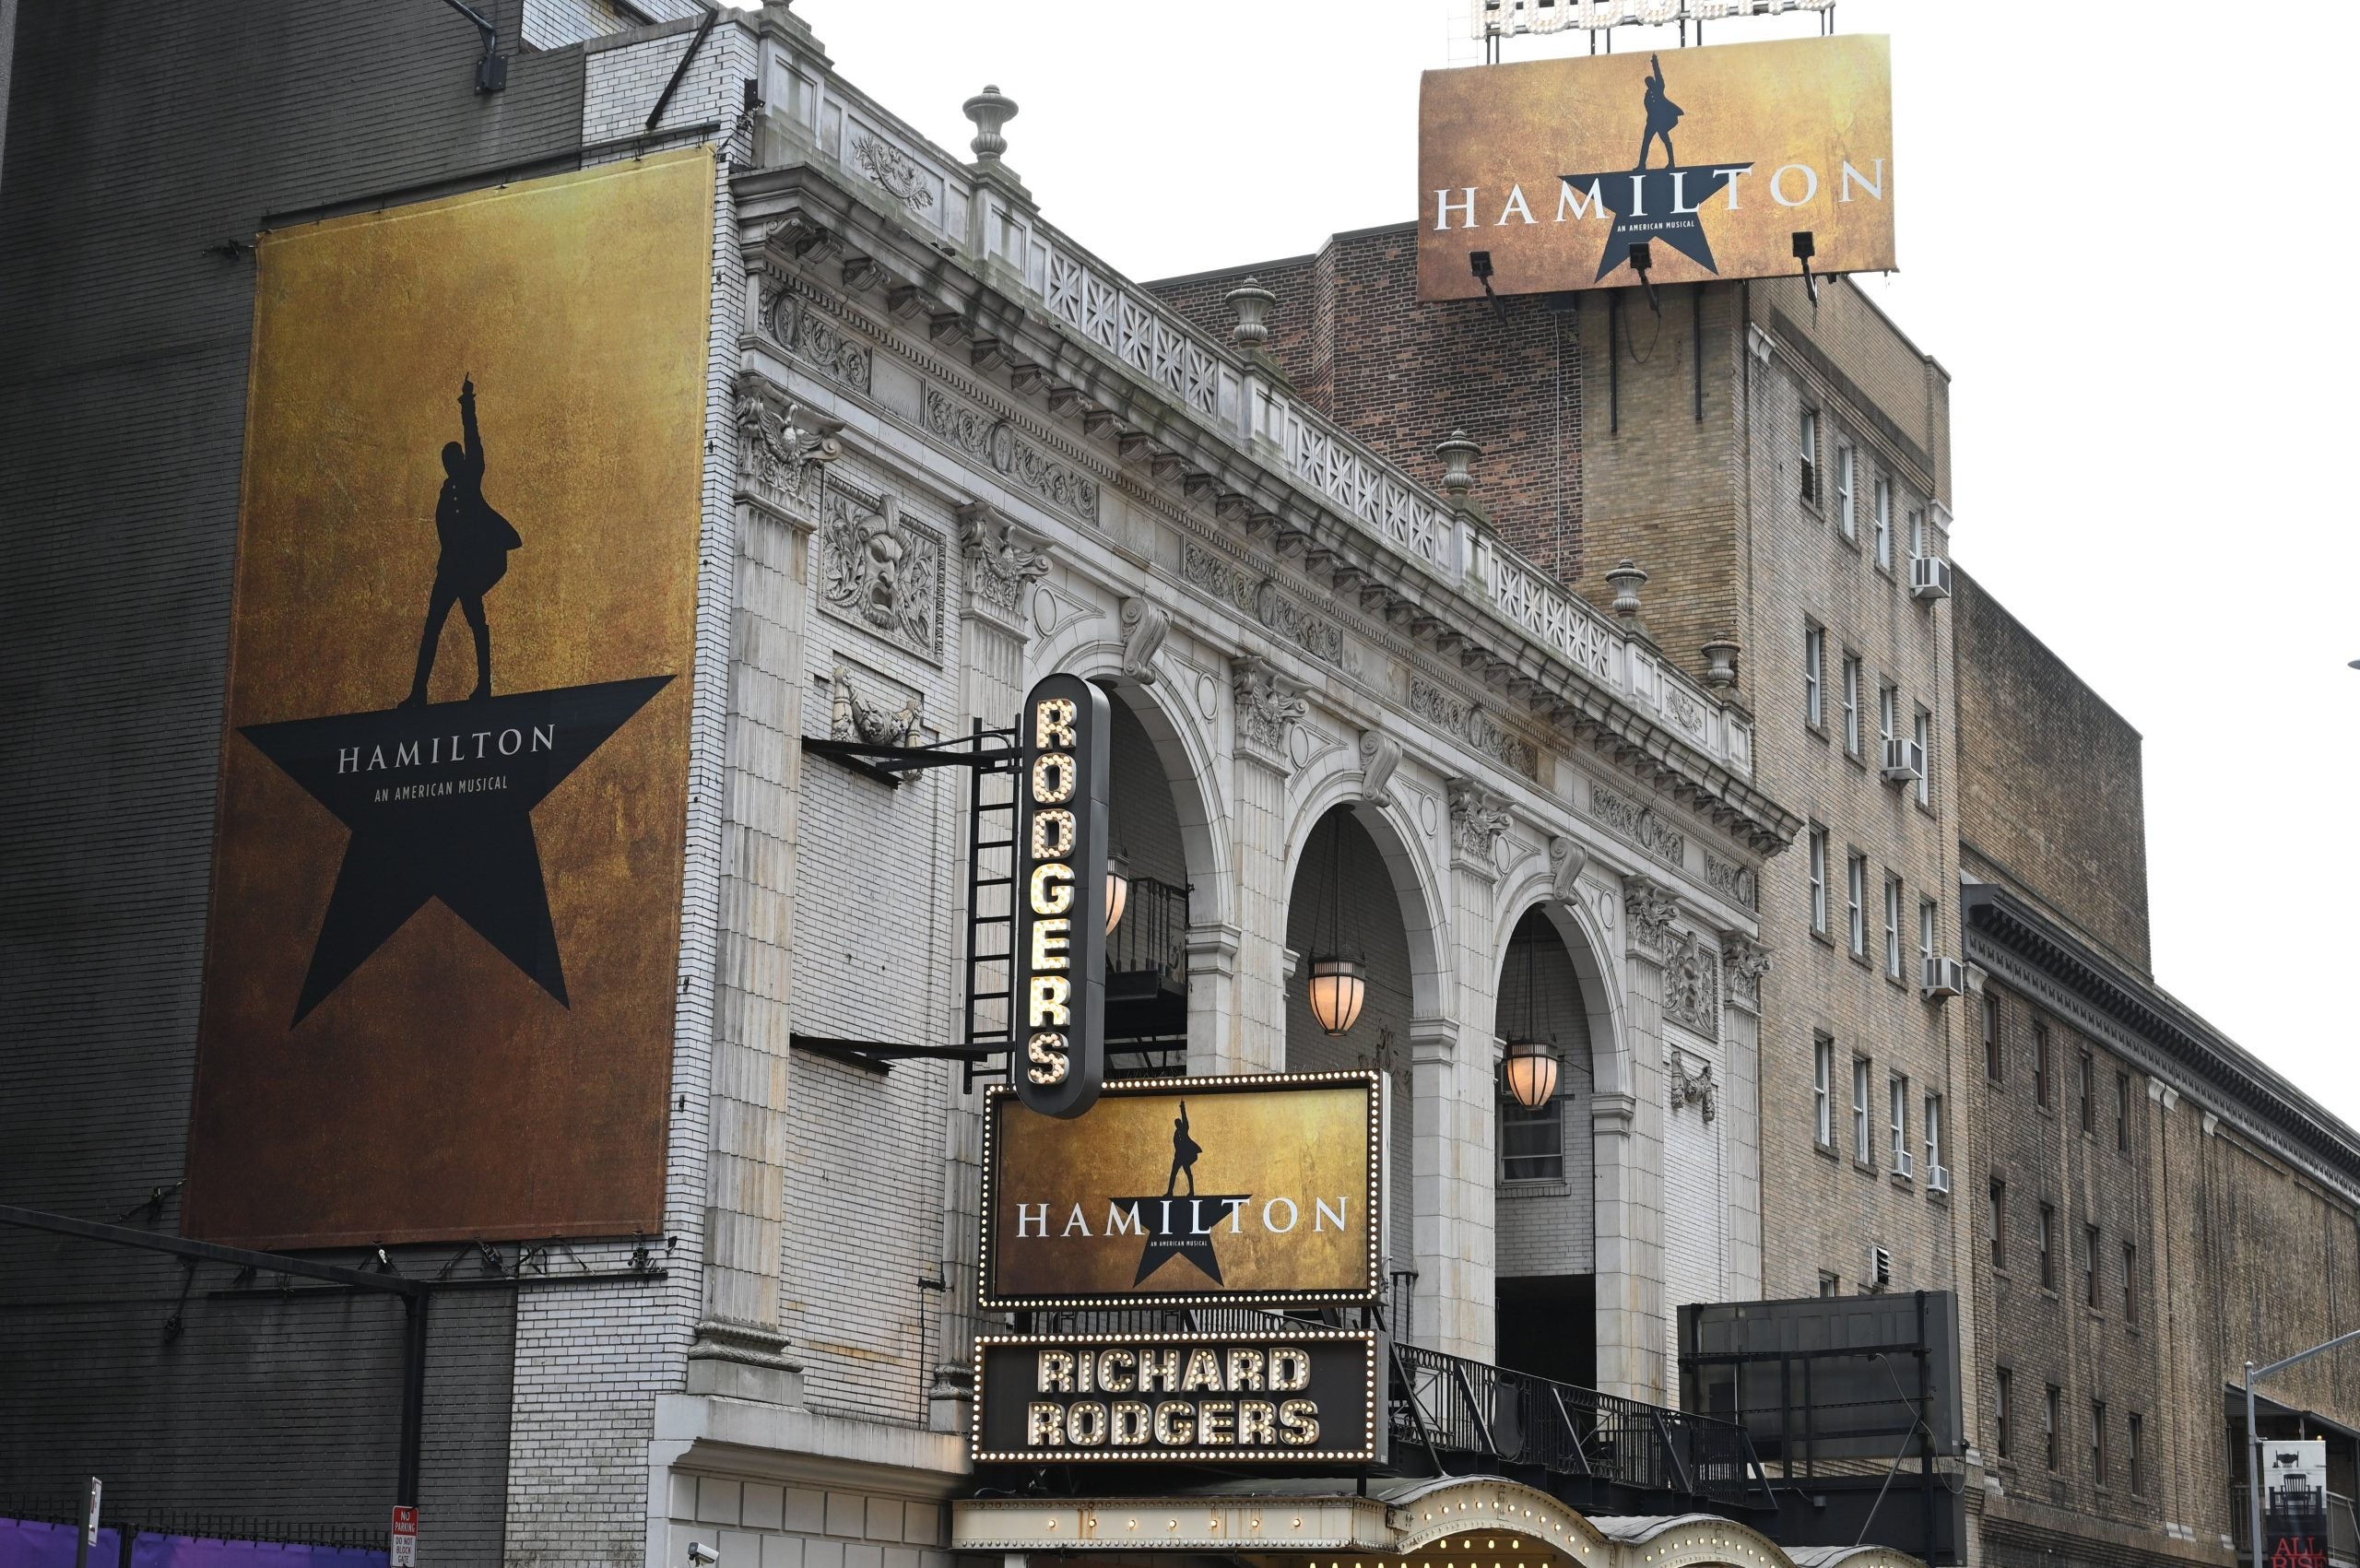 Black Trans Nonbinary ‘Hamilton’ Actor Claims They Were Fired in Retaliation for Requesting a Gender-Neutral Dressing Room